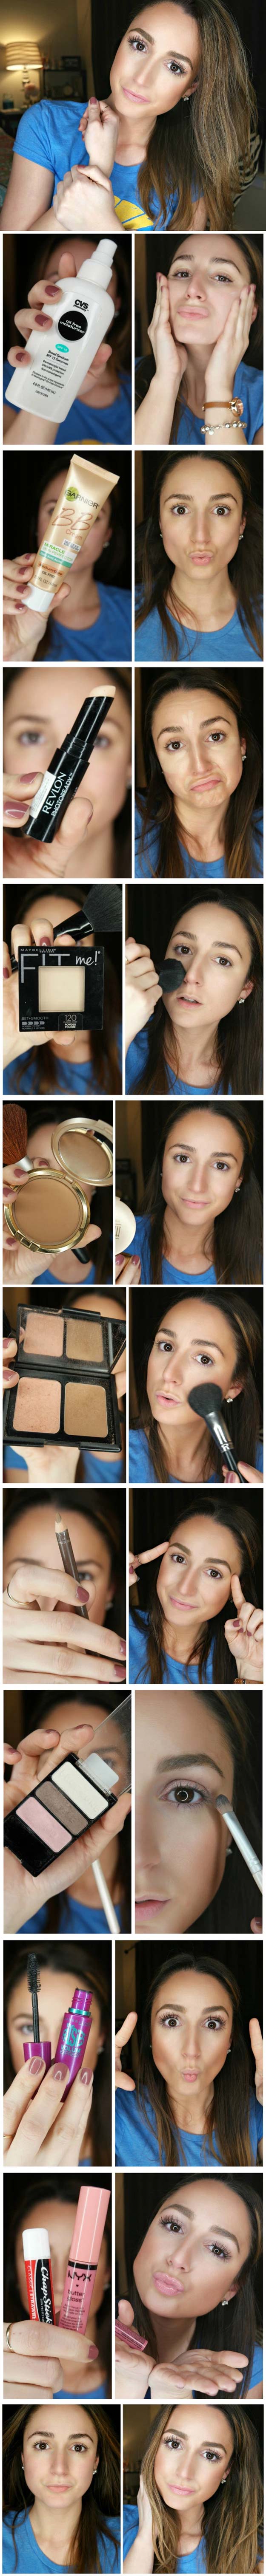 Best Makeup Tutorials for Teens -5 Minute Everyday Makeup Routine - Easy Makeup Ideas for Beginners - Step by Step Tutorials for Foundation, Eye Shadow, Lipstick, Cheeks, Contour, Eyebrows and Eyes - Awesome Makeup Hacks and Tips for Simple DIY Beauty - Day and Evening Looks http://diyprojectsforteens.com/makeup-tutorials-teens 